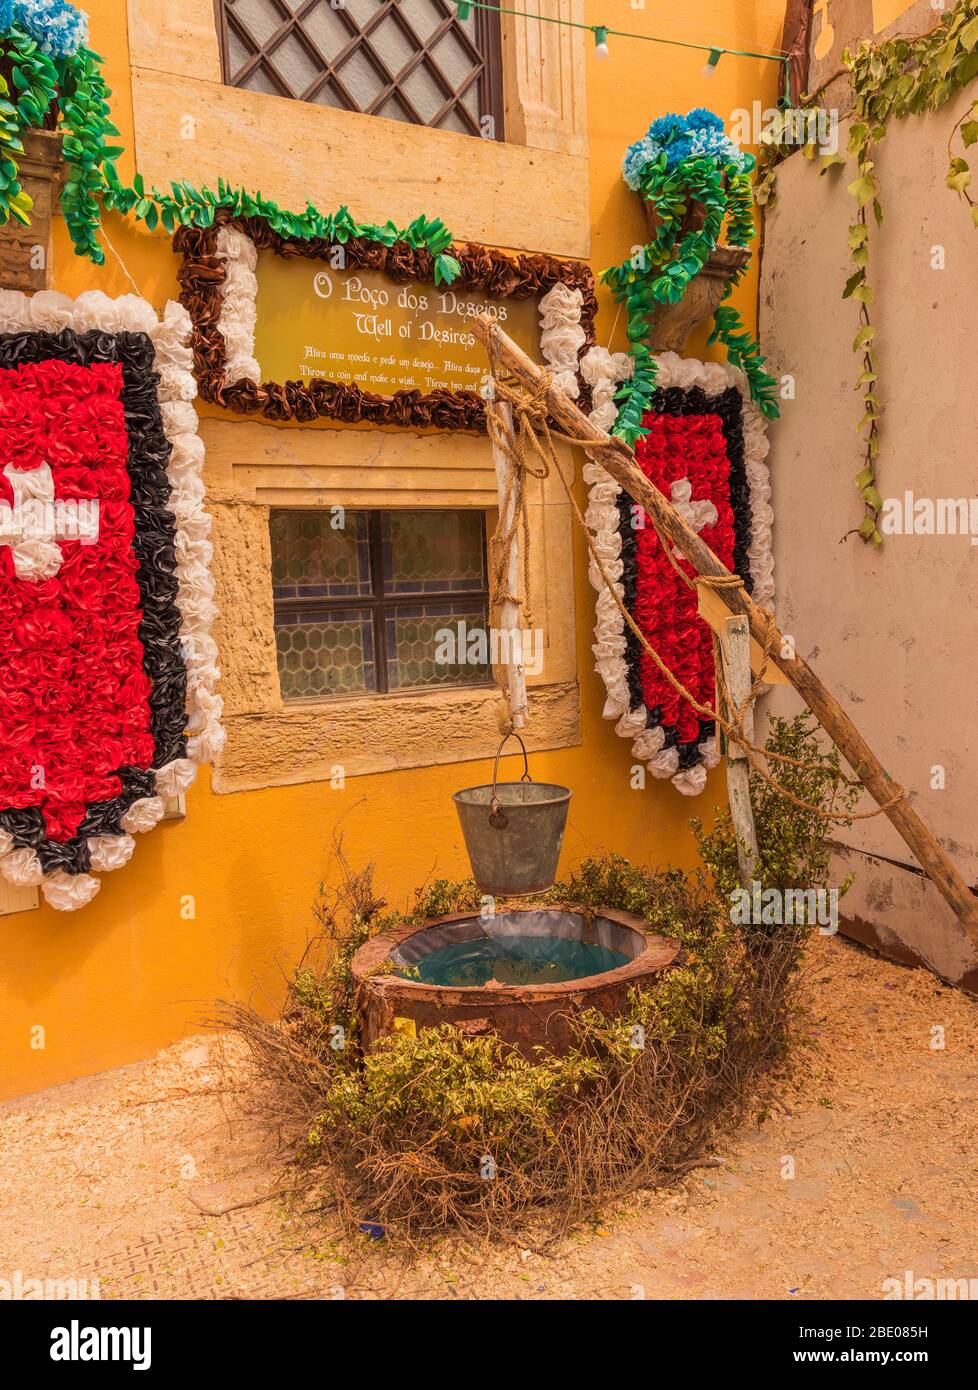 Colourful decorated courtyard with wall and shields made of flowers during traditional Festa dos Tabuleiros Festival of the Trays Tomar Portugal. Stock Photo